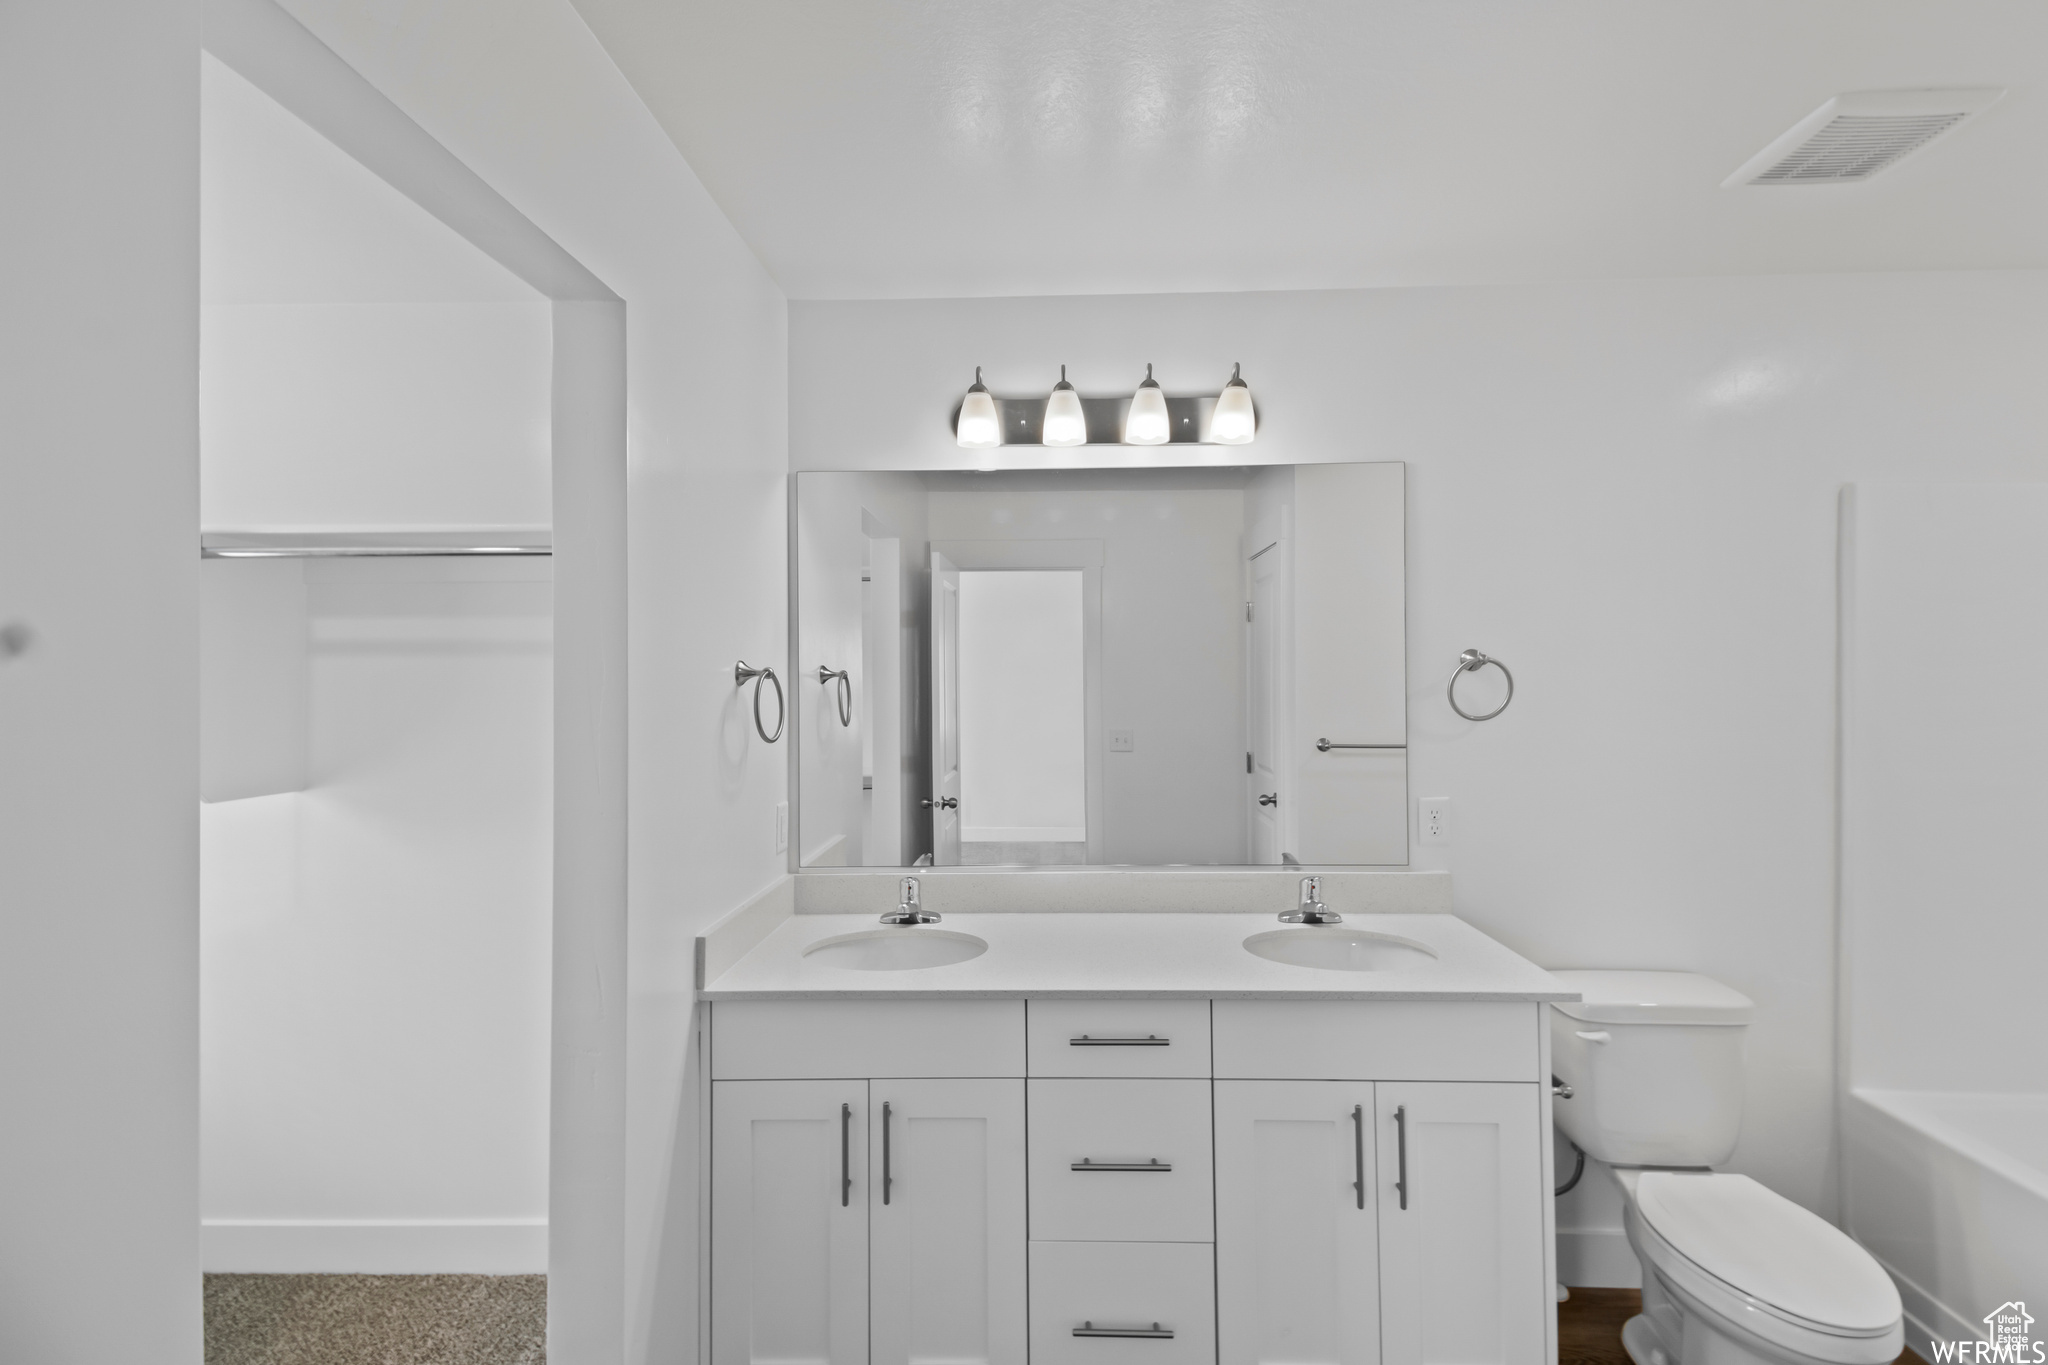 Full bathroom with washtub / shower combination, toilet, vanity with extensive cabinet space, and dual sinks